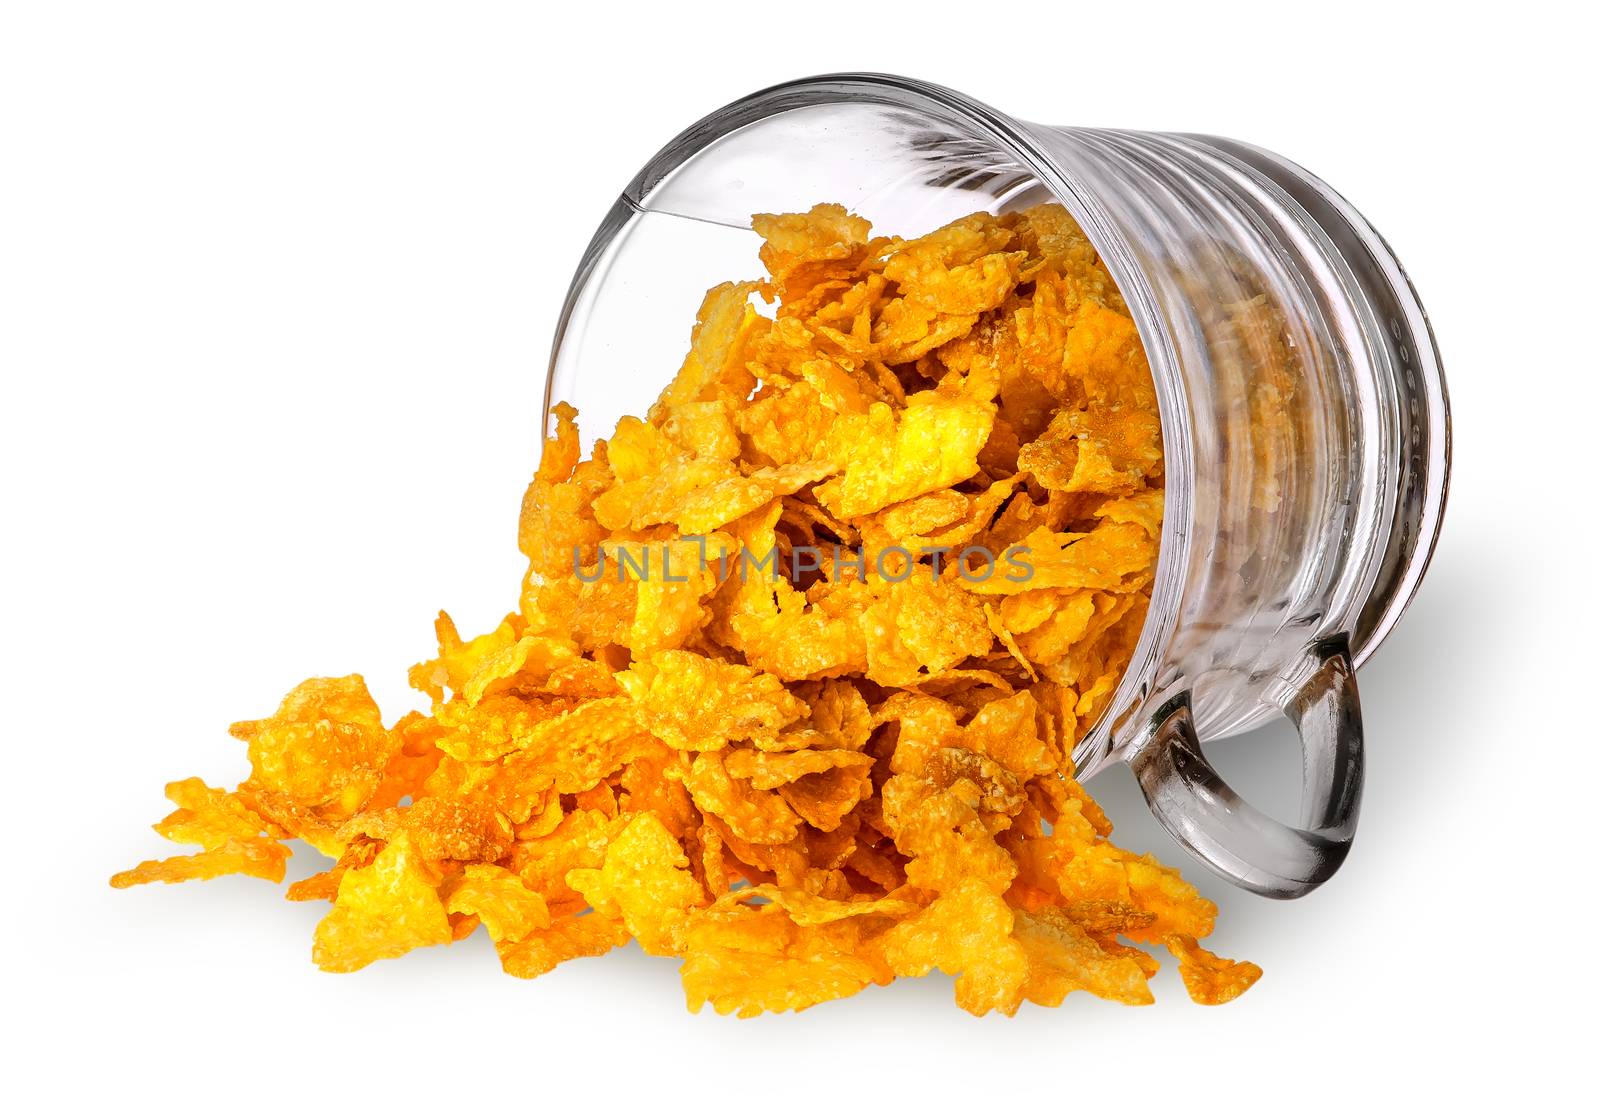 Cornflakes spill out of a glass cup isolated on white background